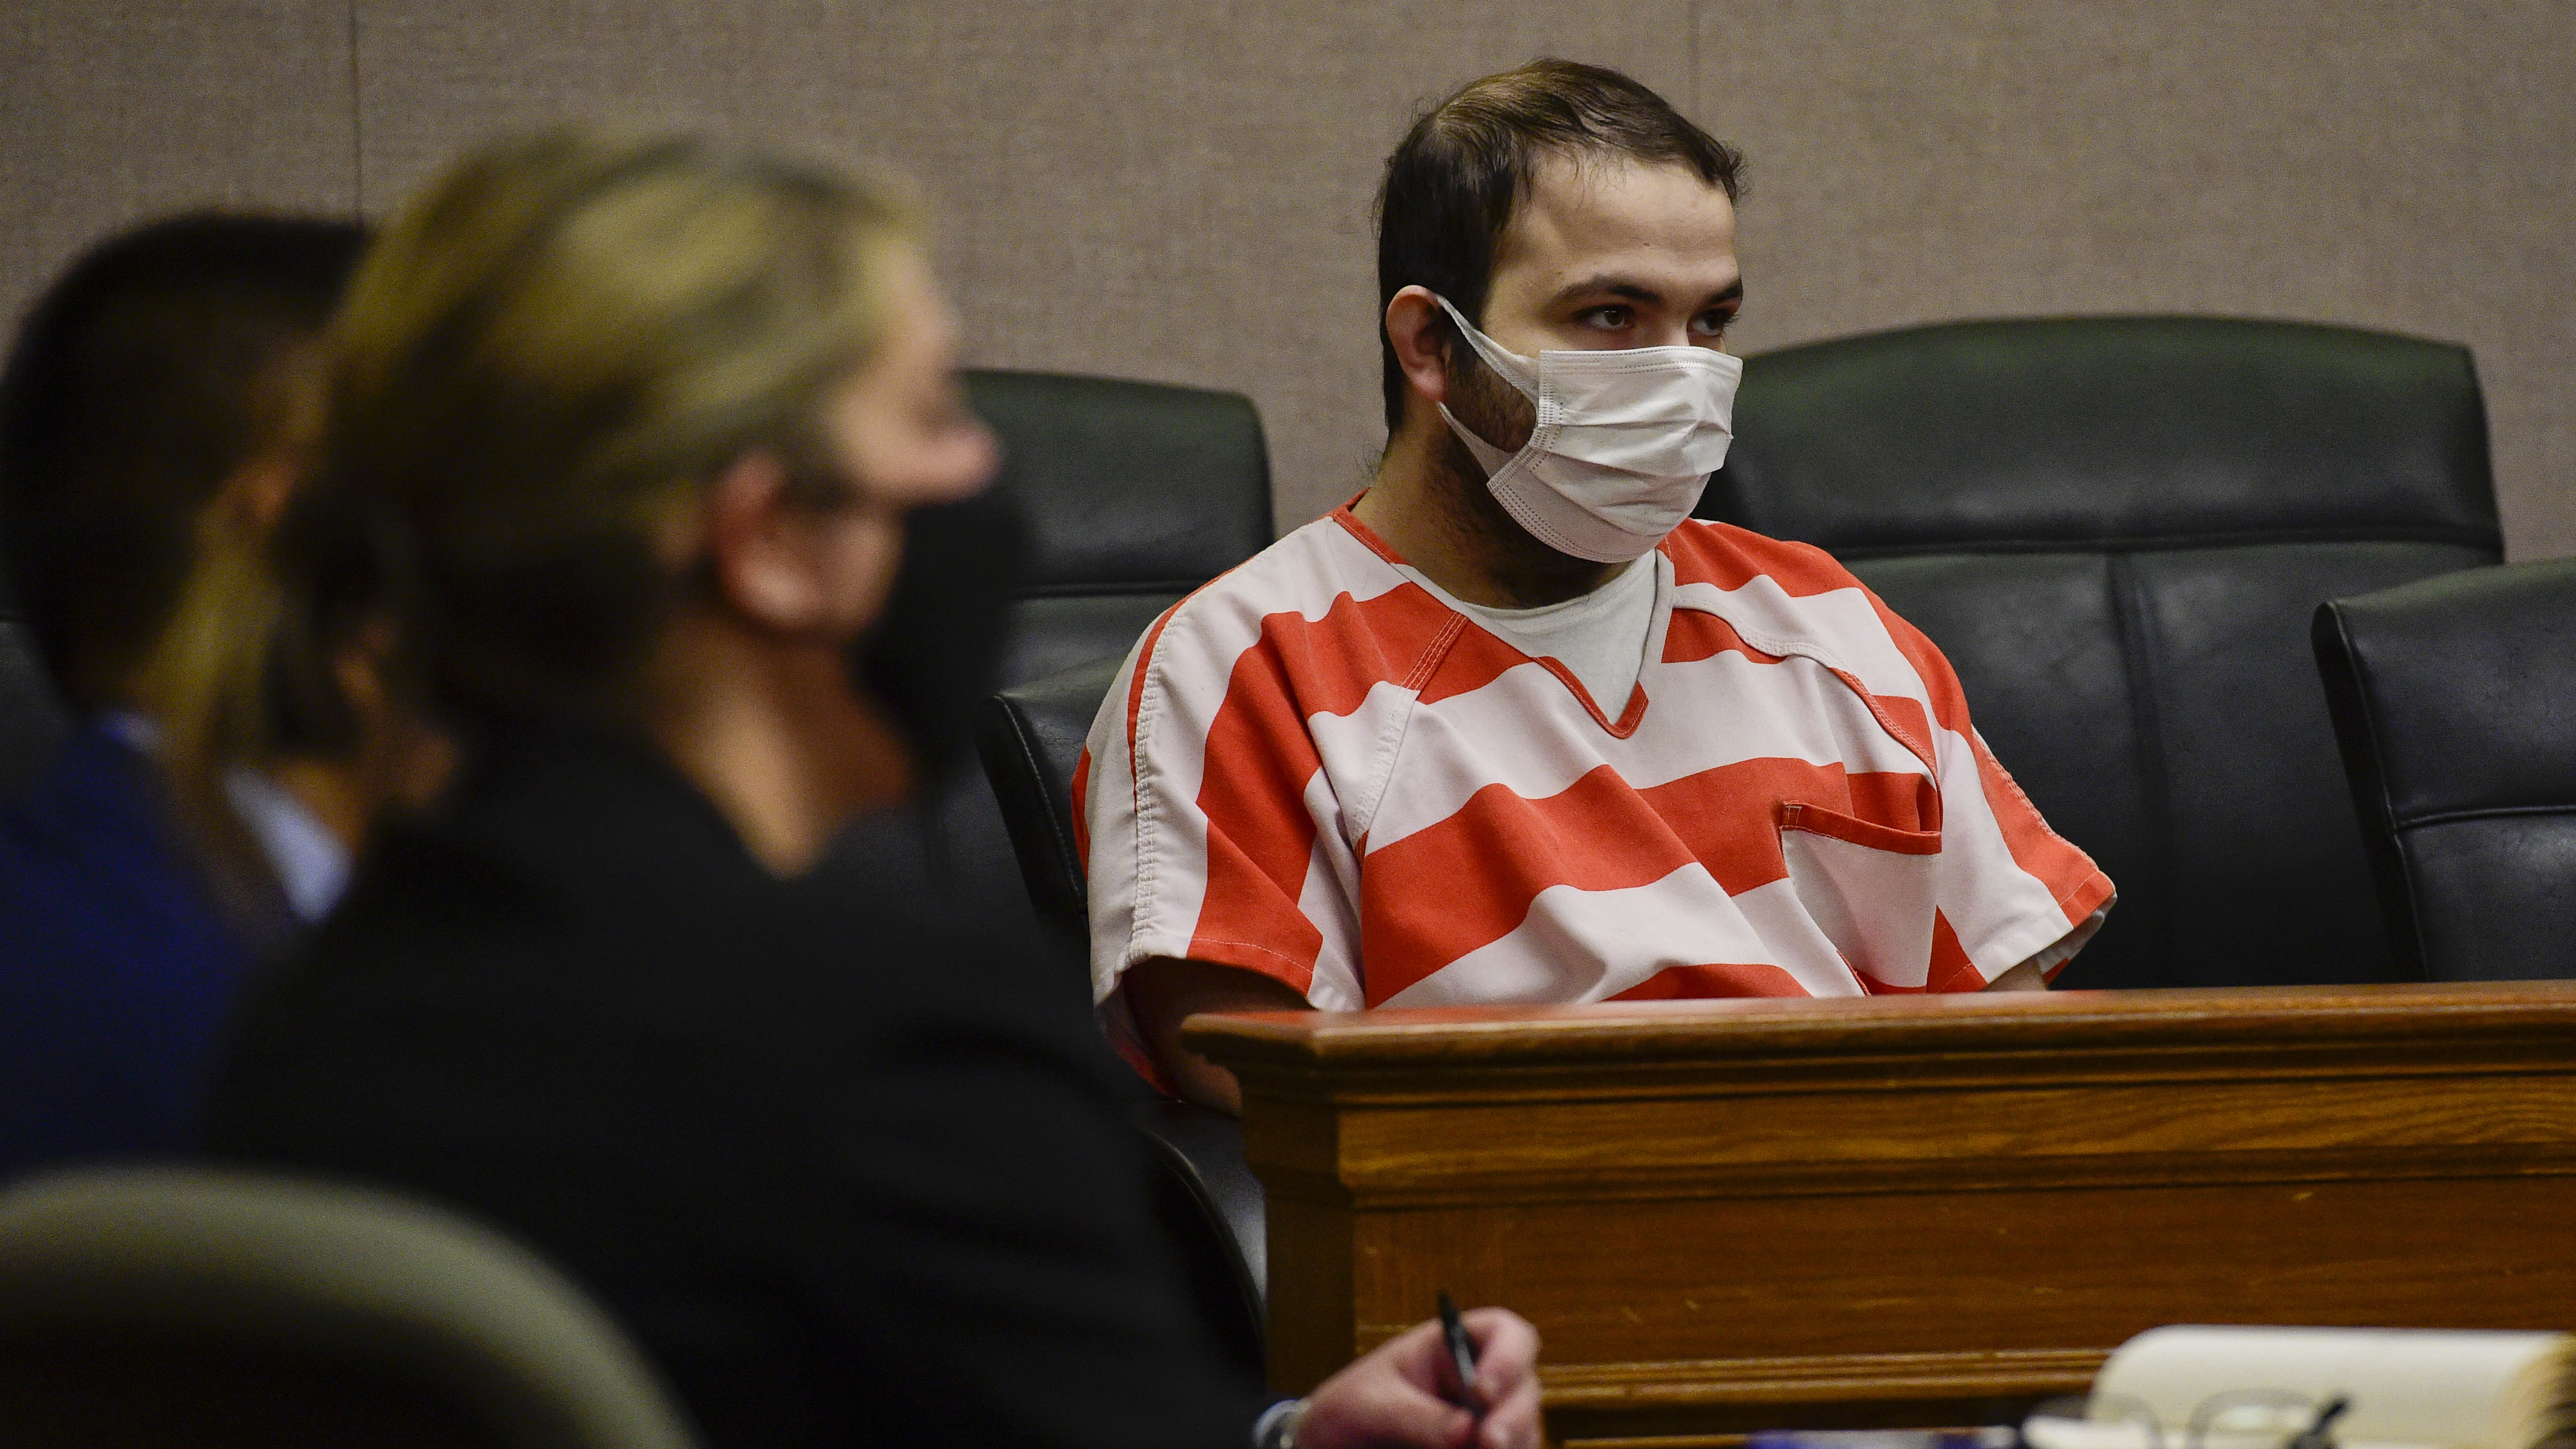 Ahmad Al Aliwi Alissa appears in a Boulder County District courtroom on May 25, 2021.